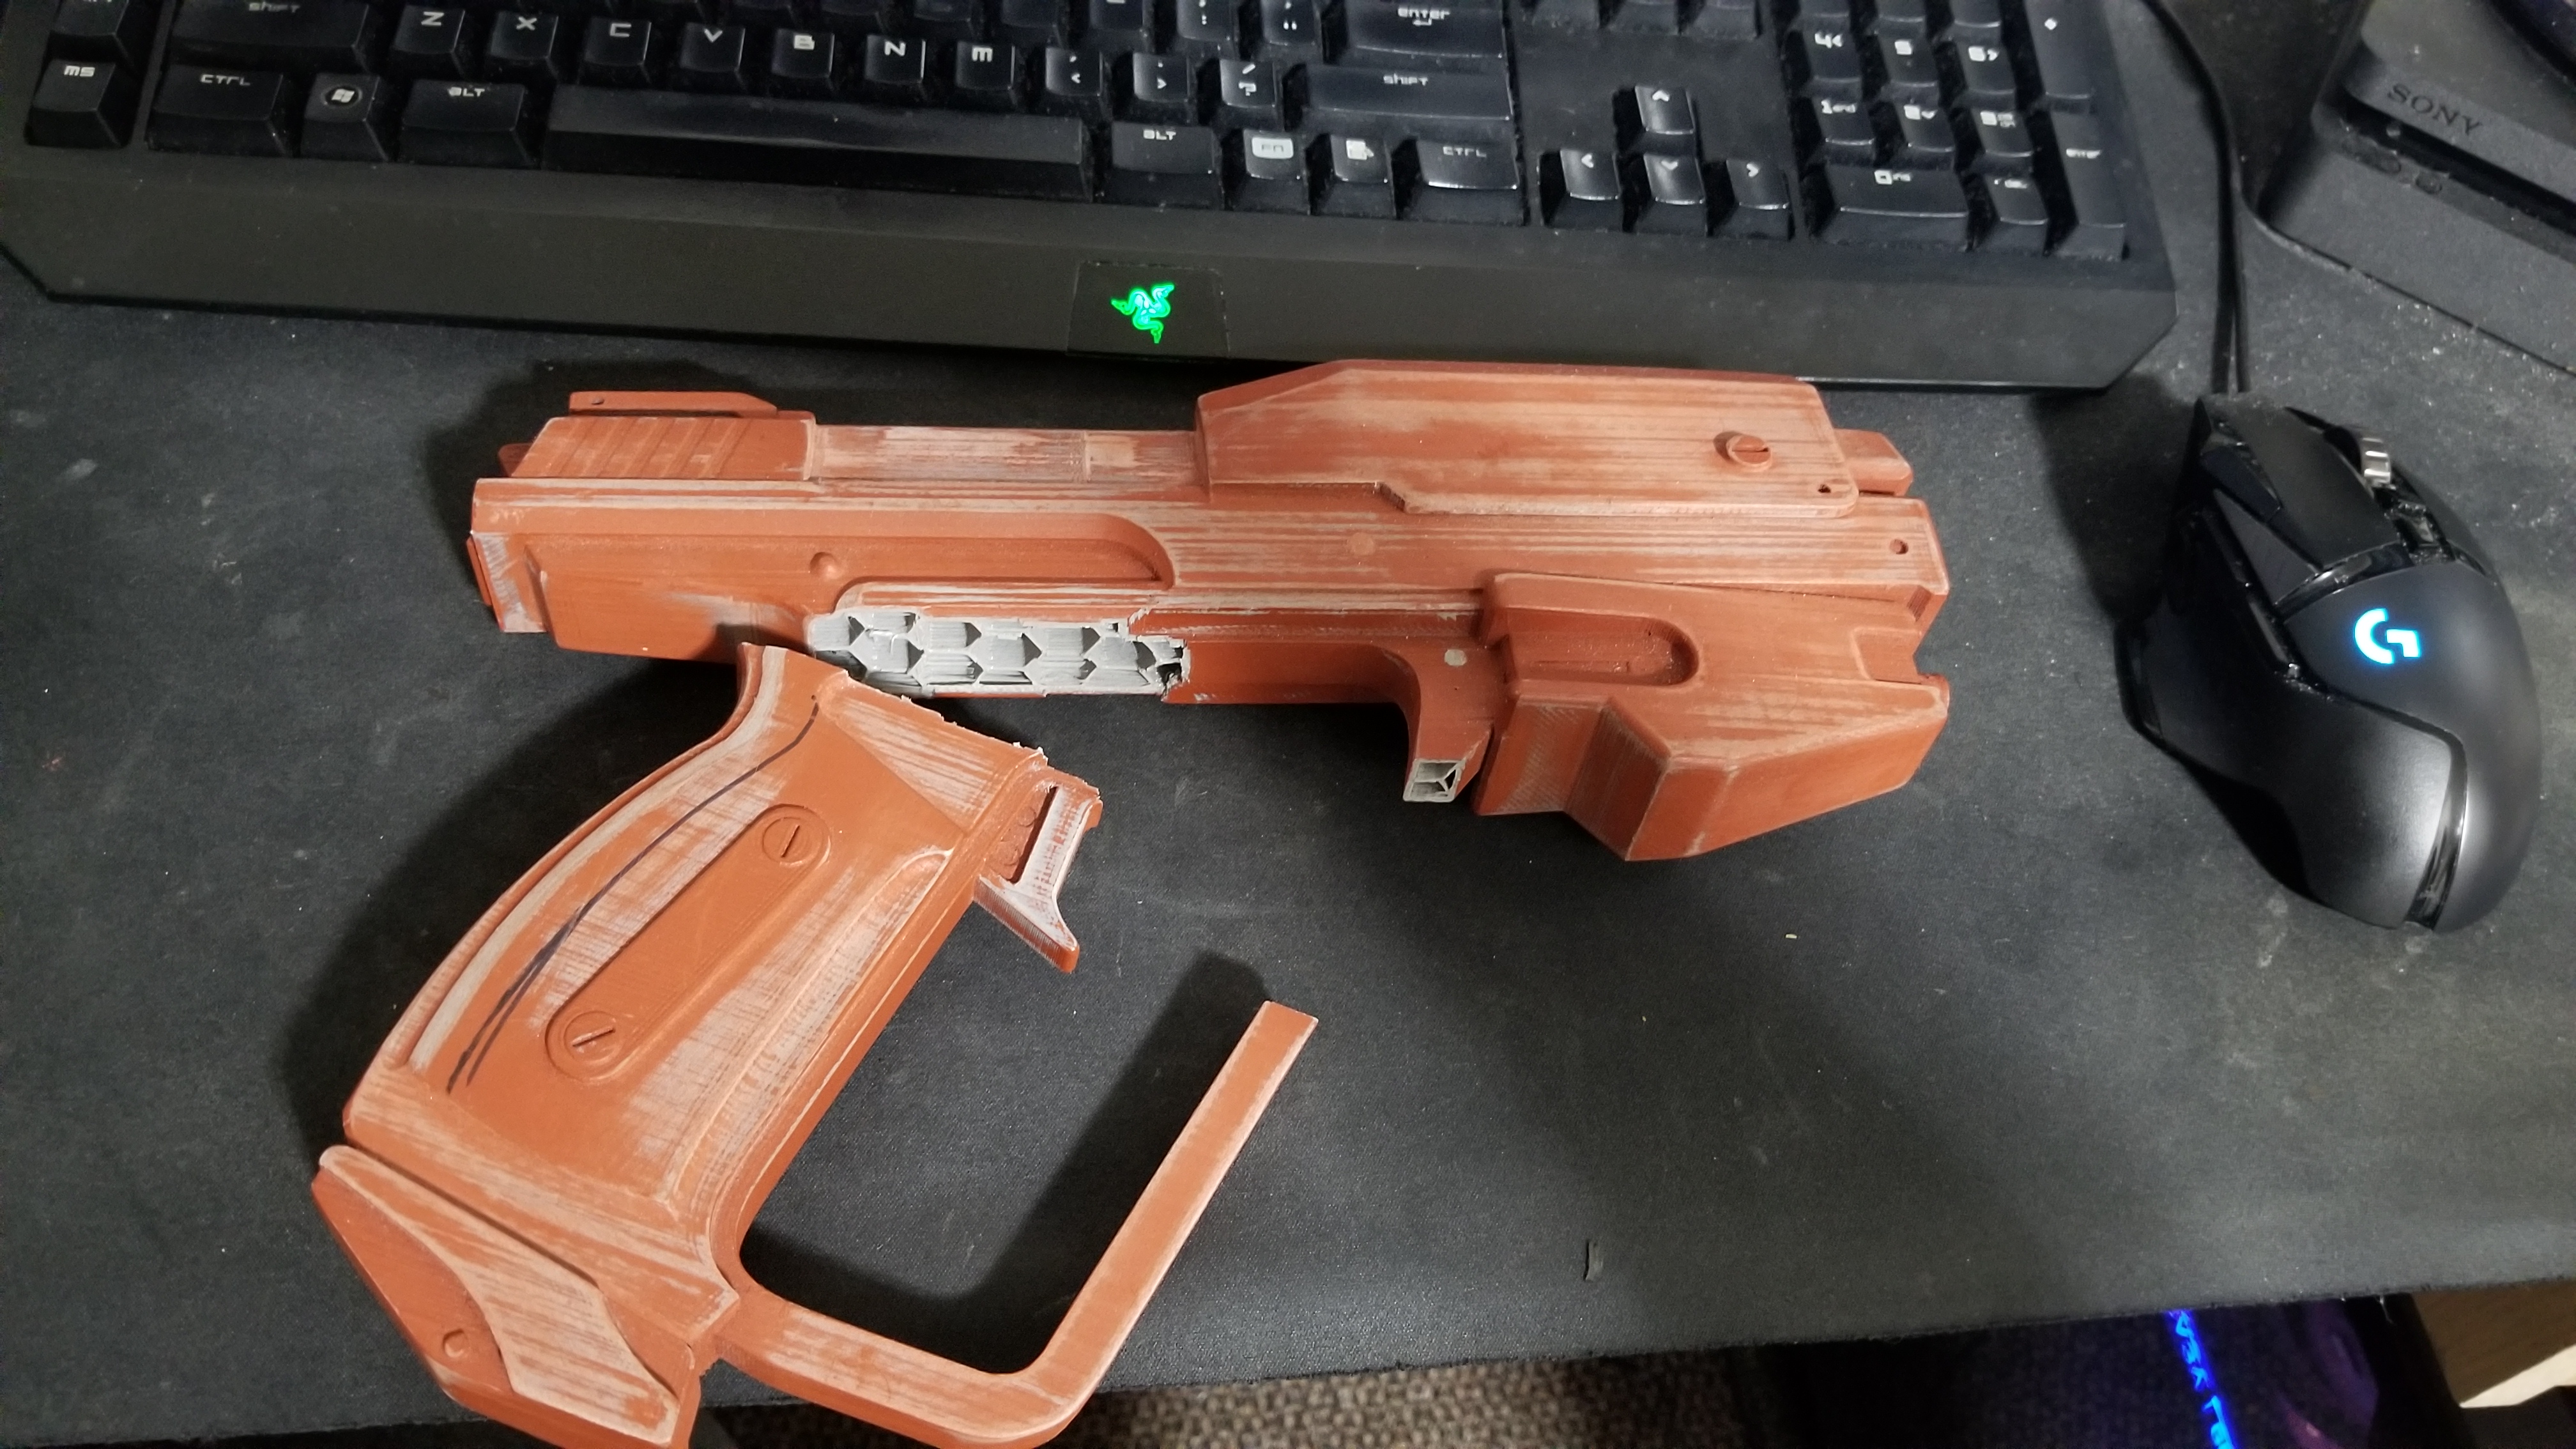 Not the pistol WIP I expect from the B button